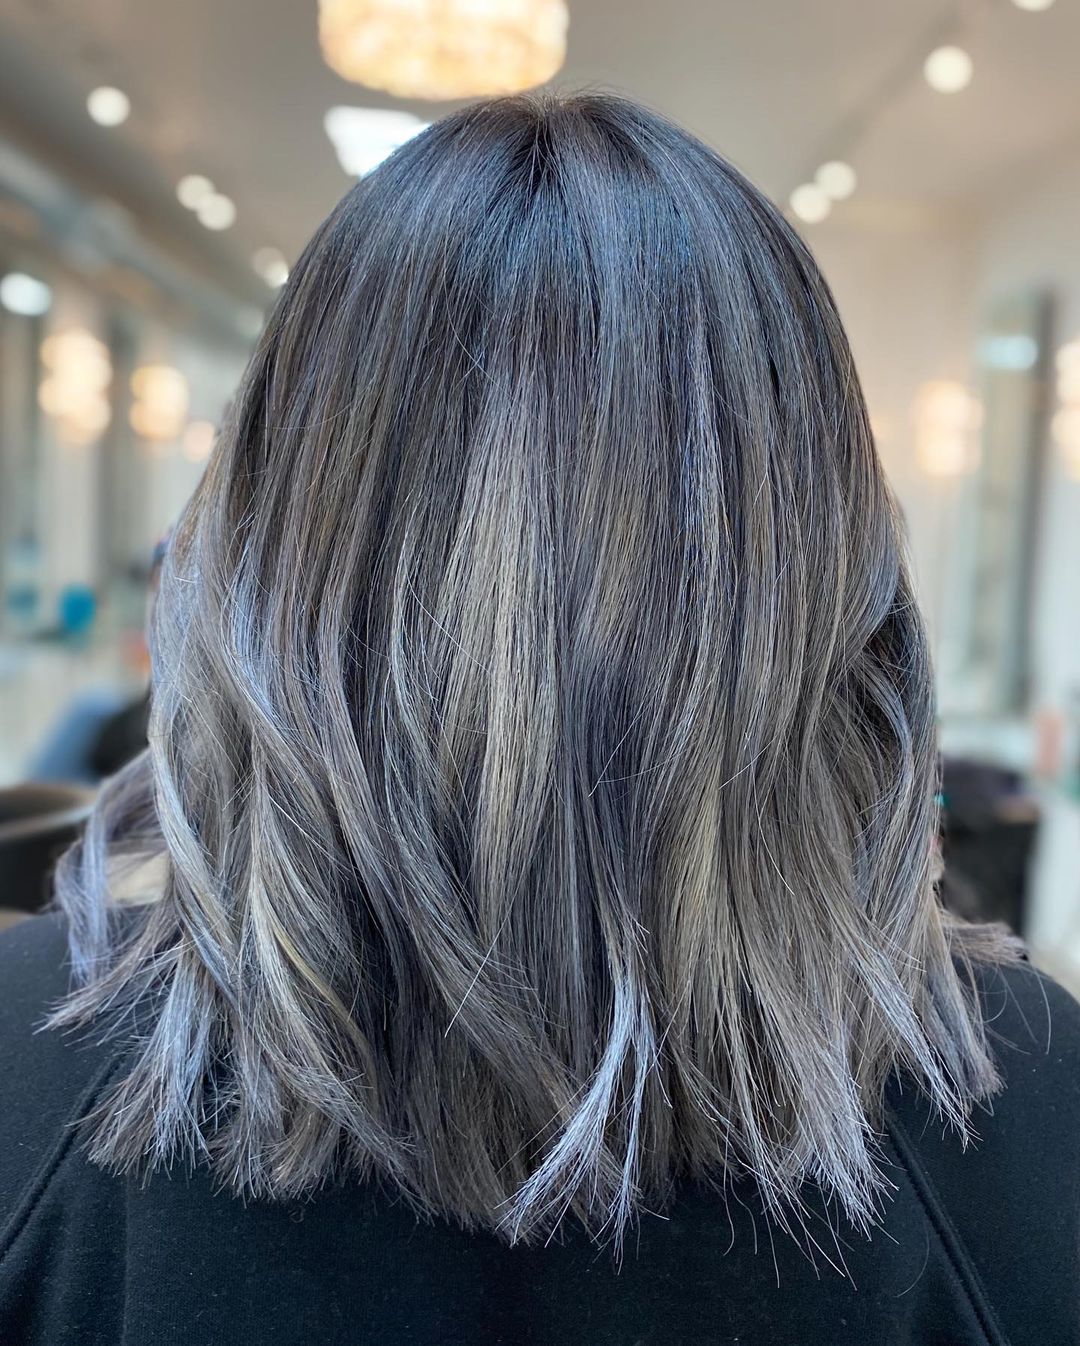 60 Ash Blonde Hair Color Ideas: Balayage, Highlights & Ombre